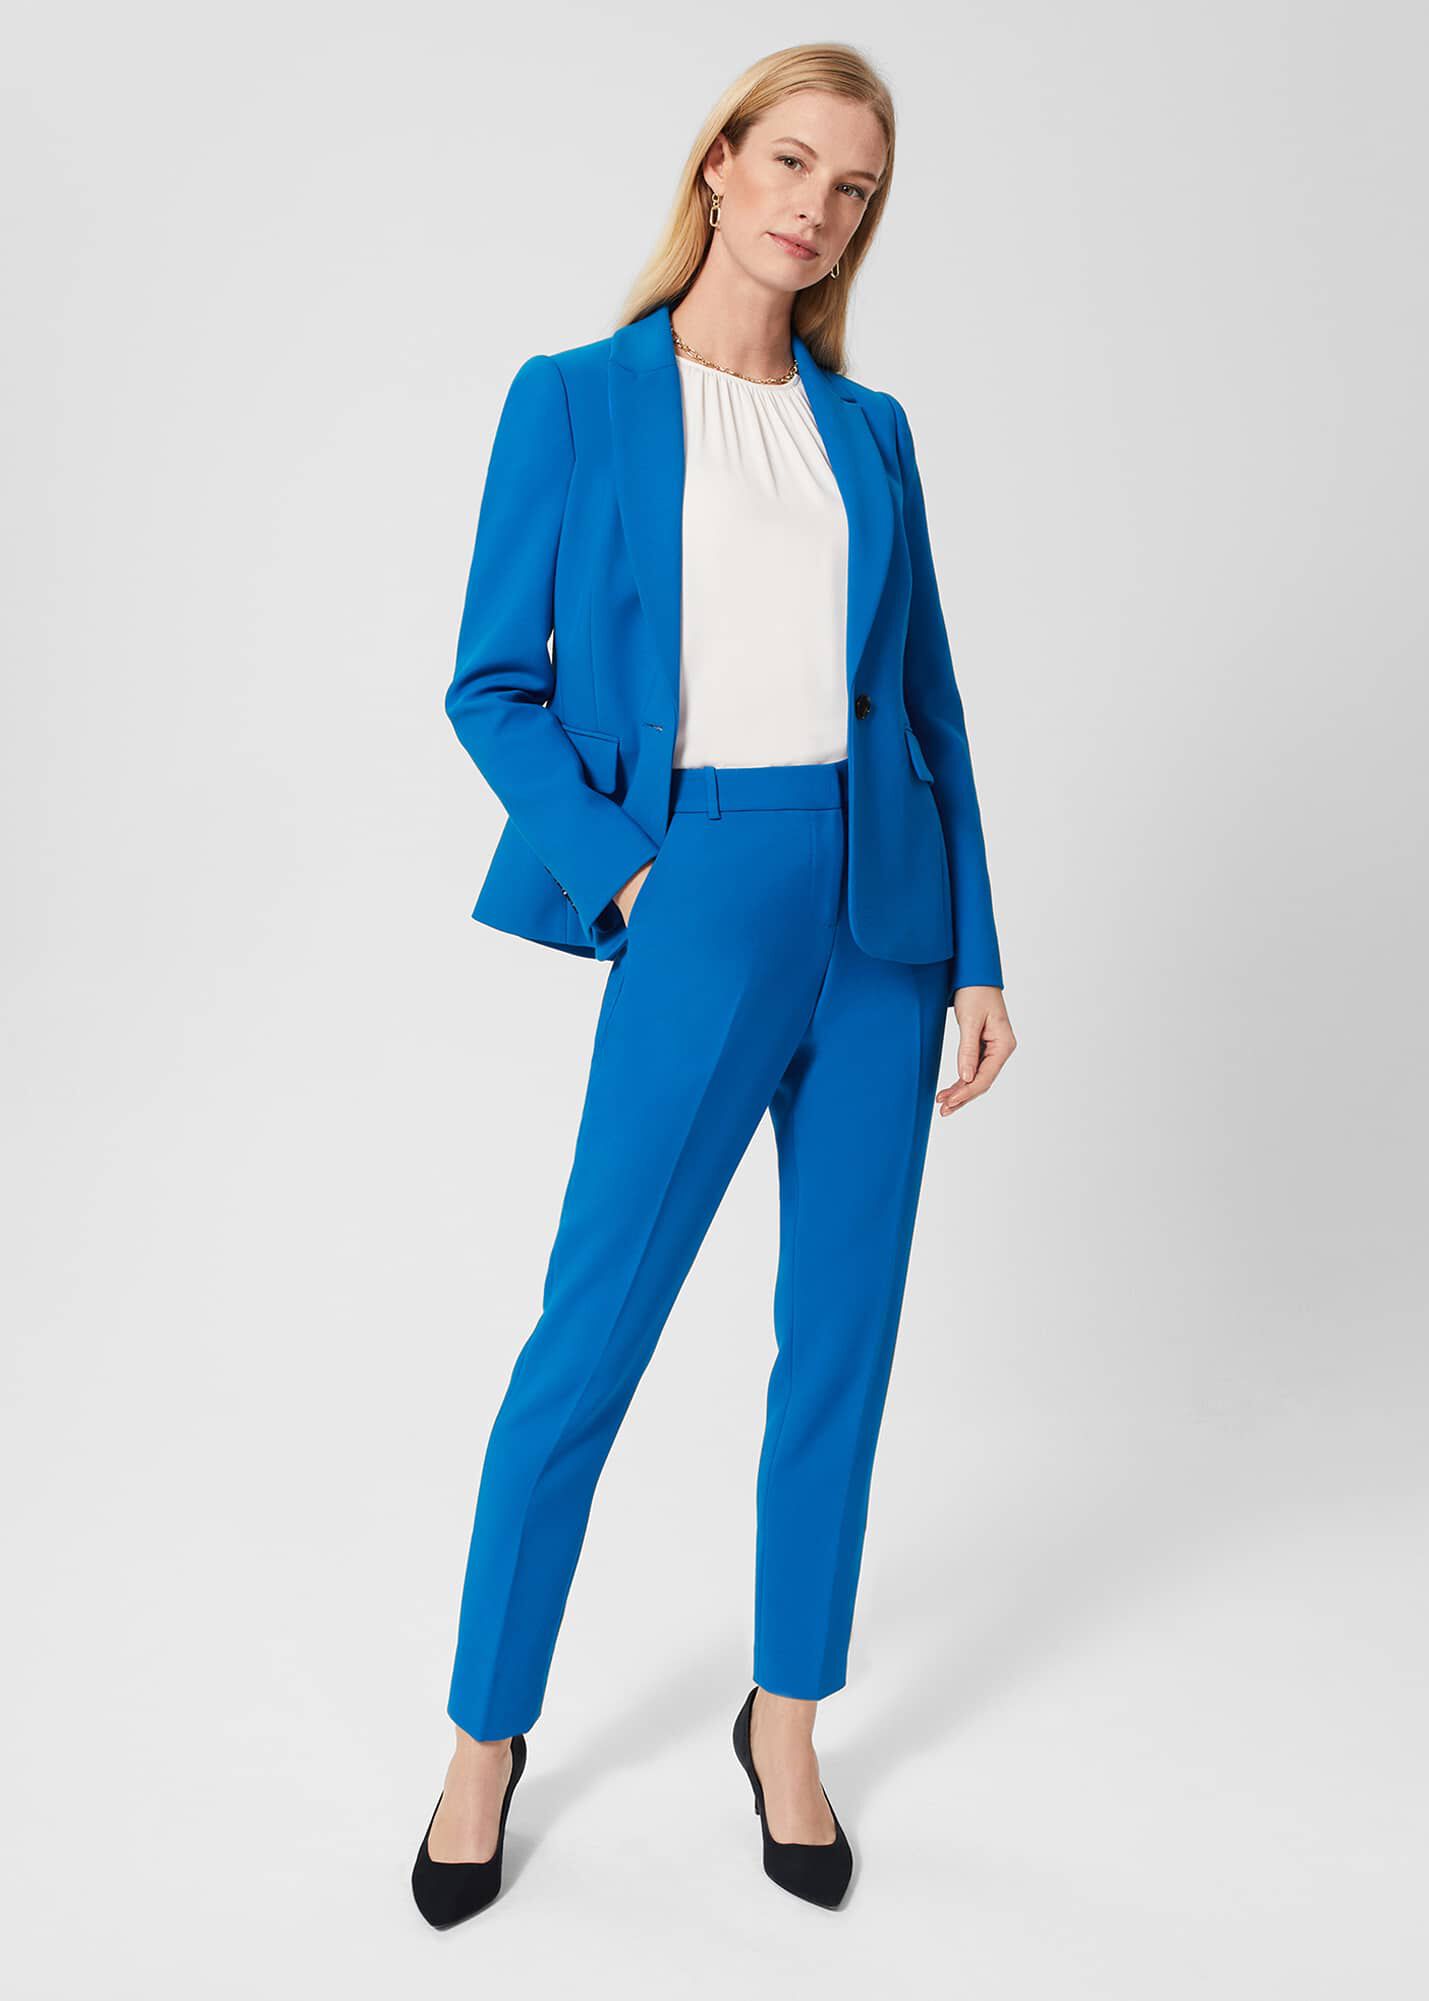 High Quality Womens Business Suit Set With Jacket And Coat OL Styles  Professional Next Ladies Trouser Suits From Matthewaw, $44.16 | DHgate.Com